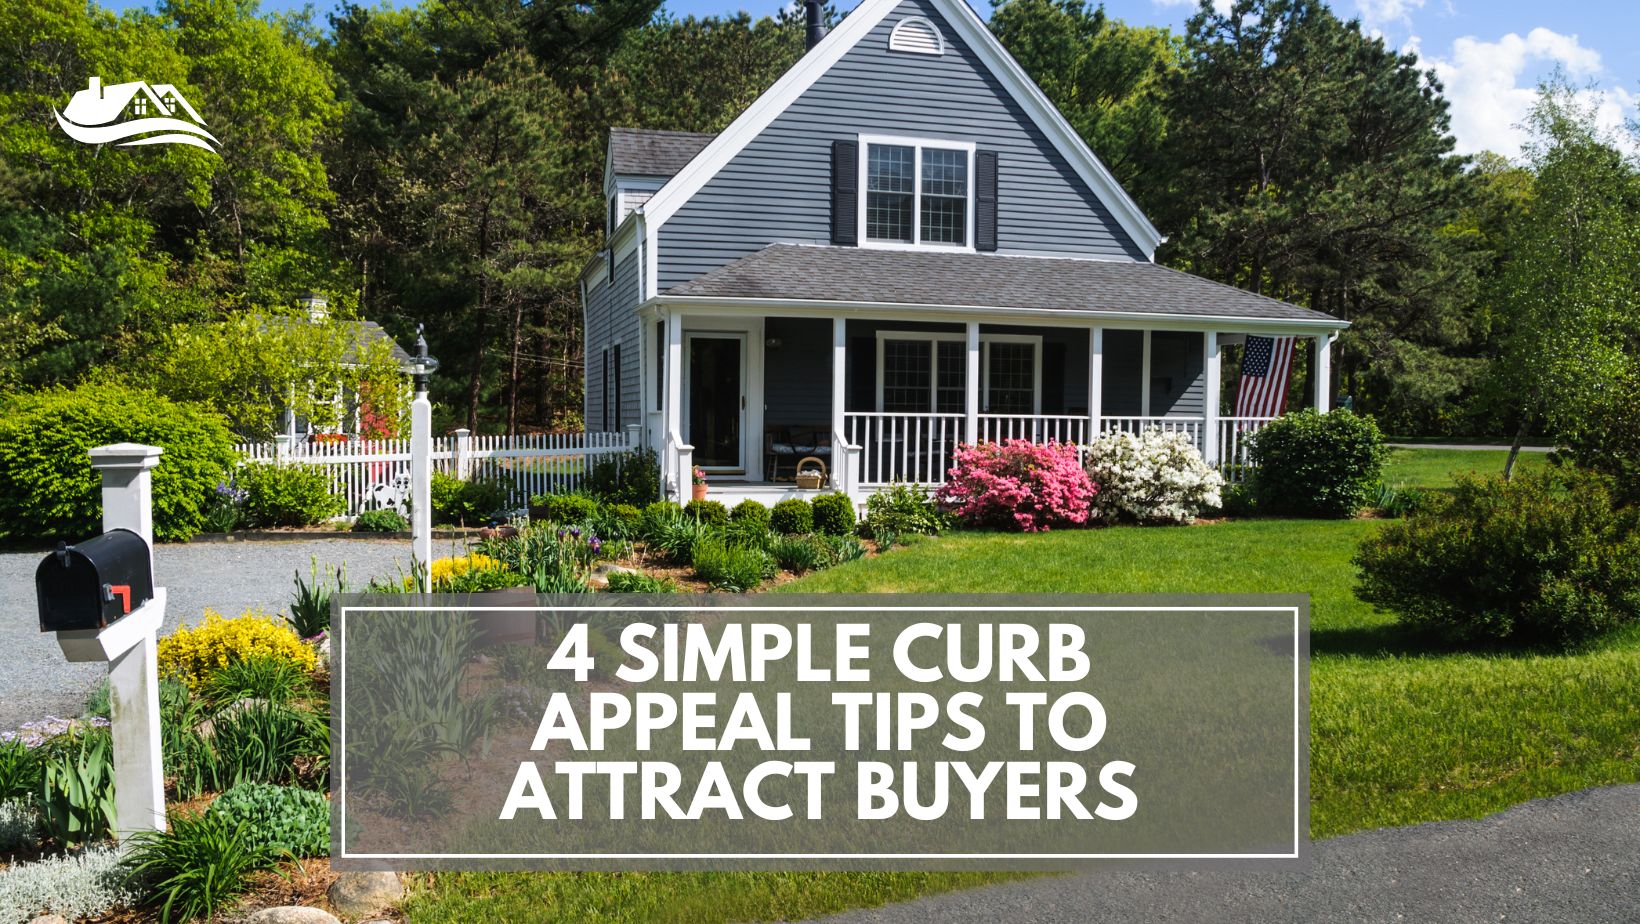 4 Simple Curb Appeal Tips to Attract Buyers